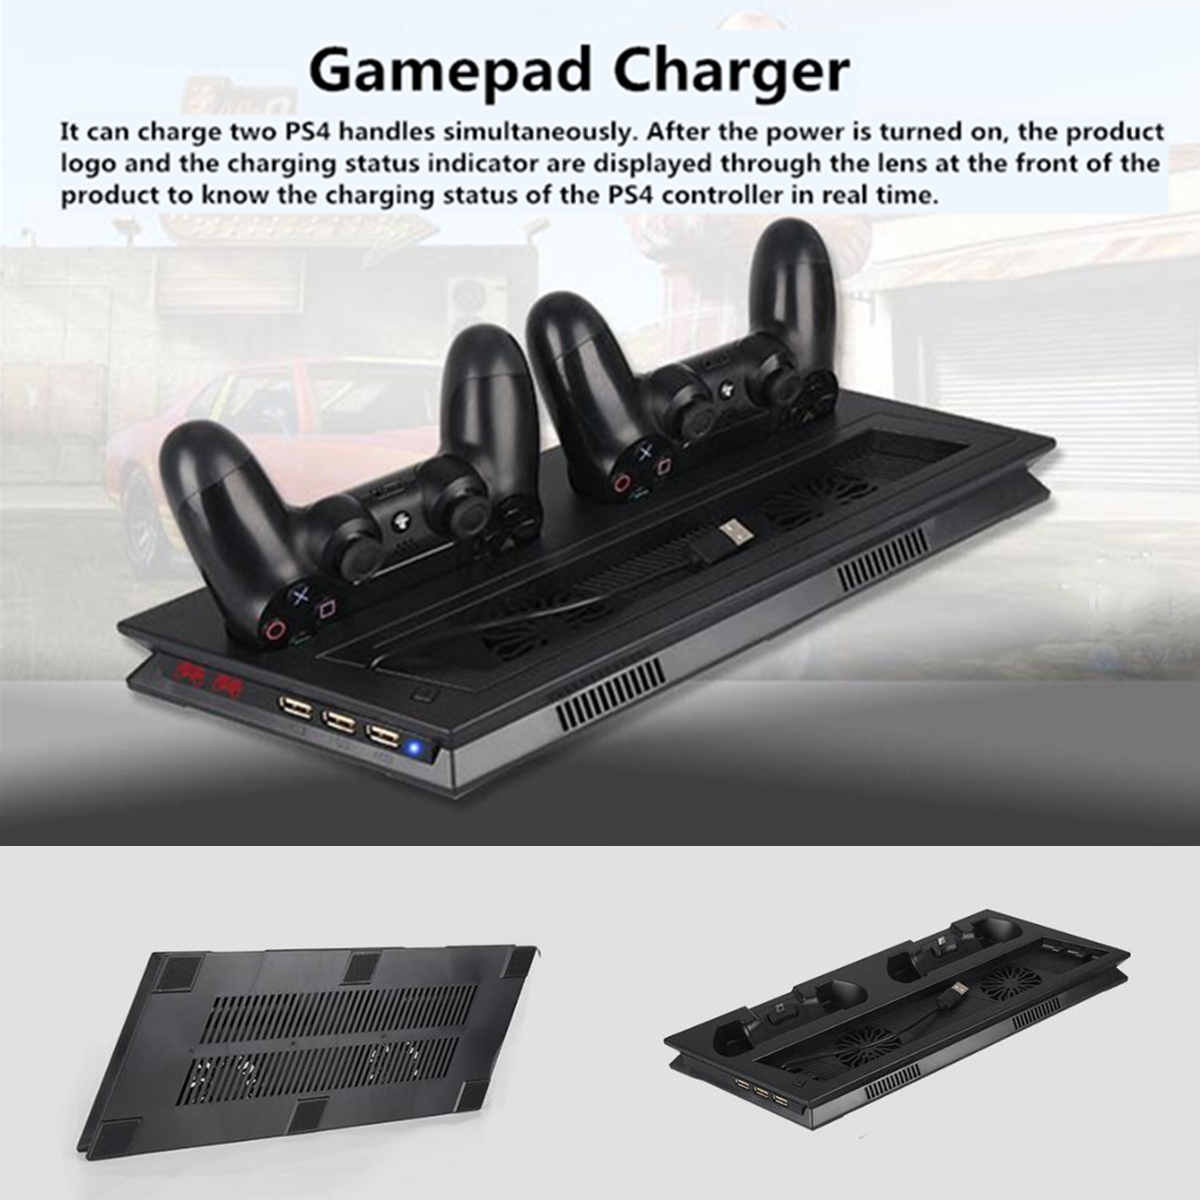 LED Charger Station Stand Charging Dock Cooling Fan for Sony Playstation 4 PS4 PRO Slim Game Console Gamepad 45